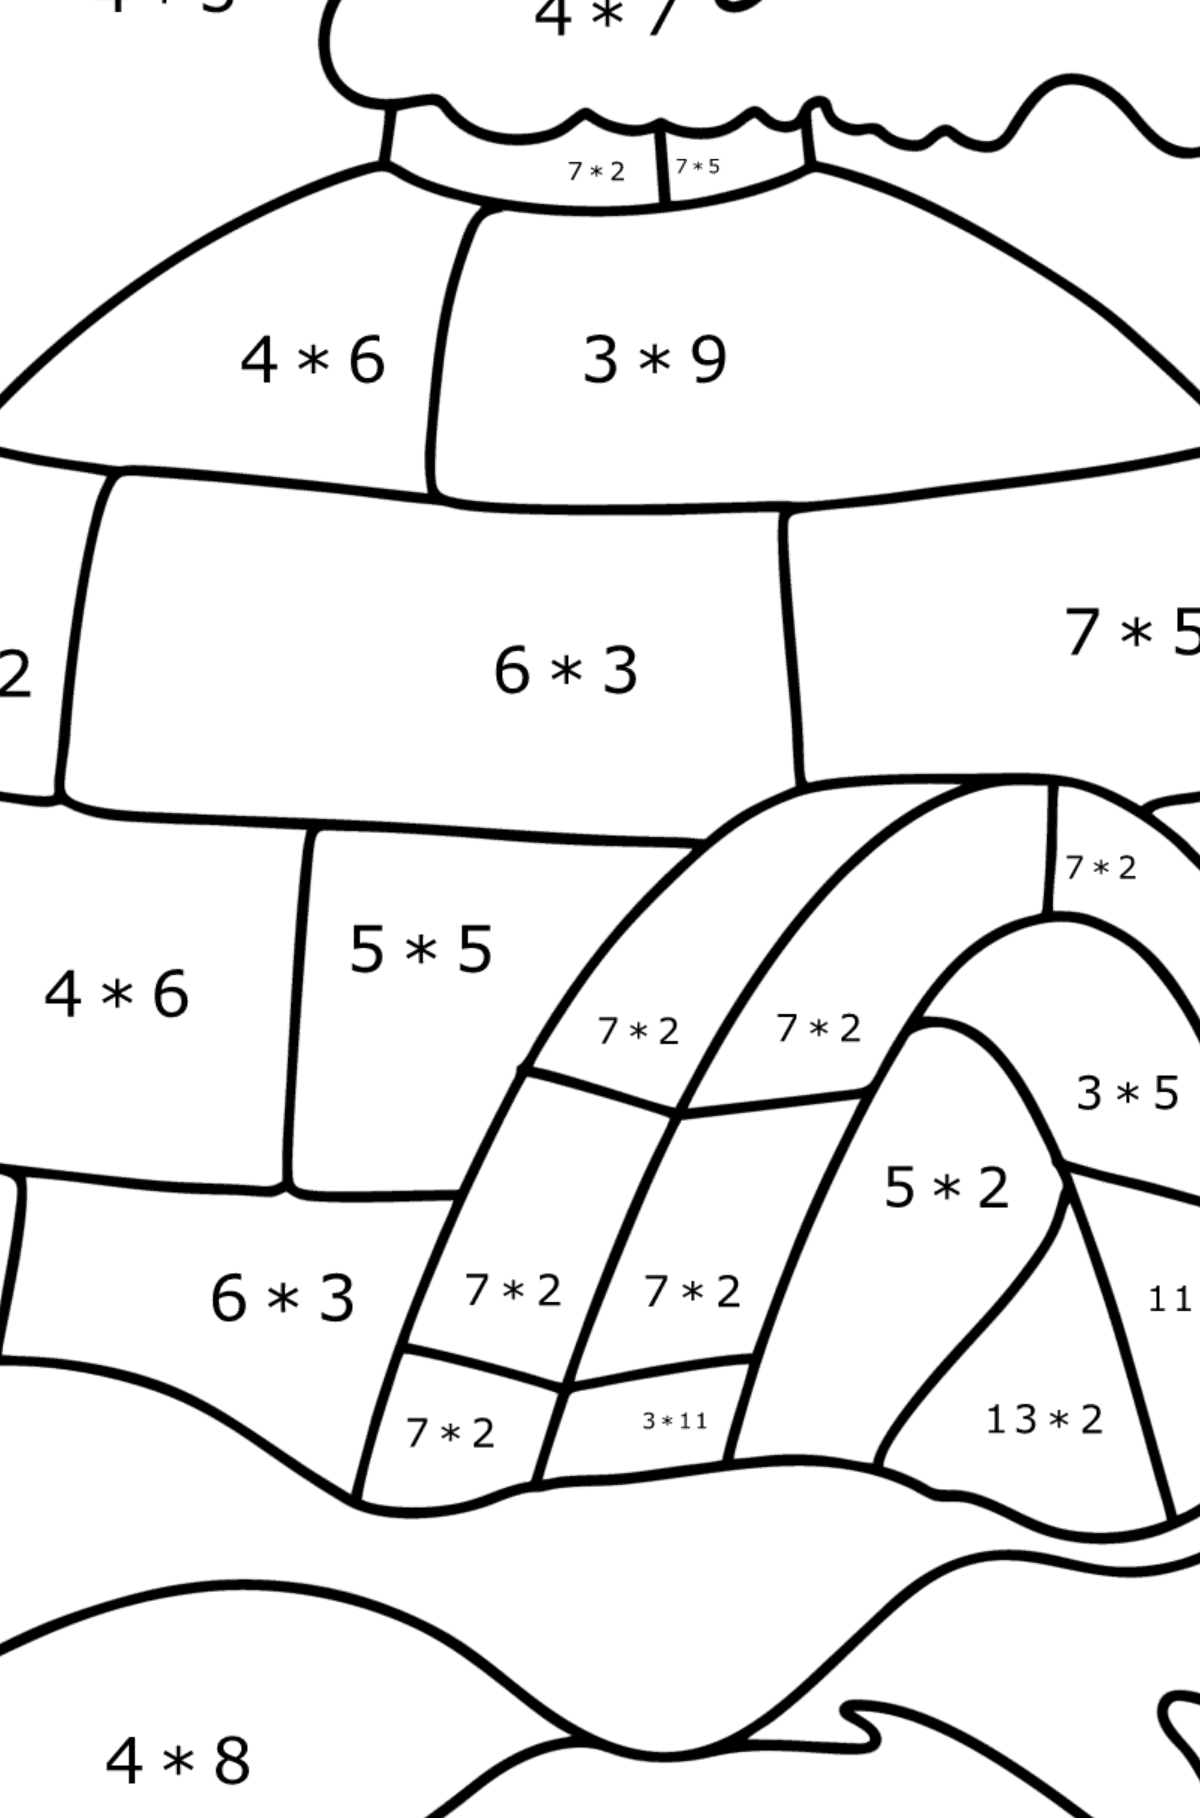 Igloo ice House coloring page - Math Coloring - Multiplication for Kids